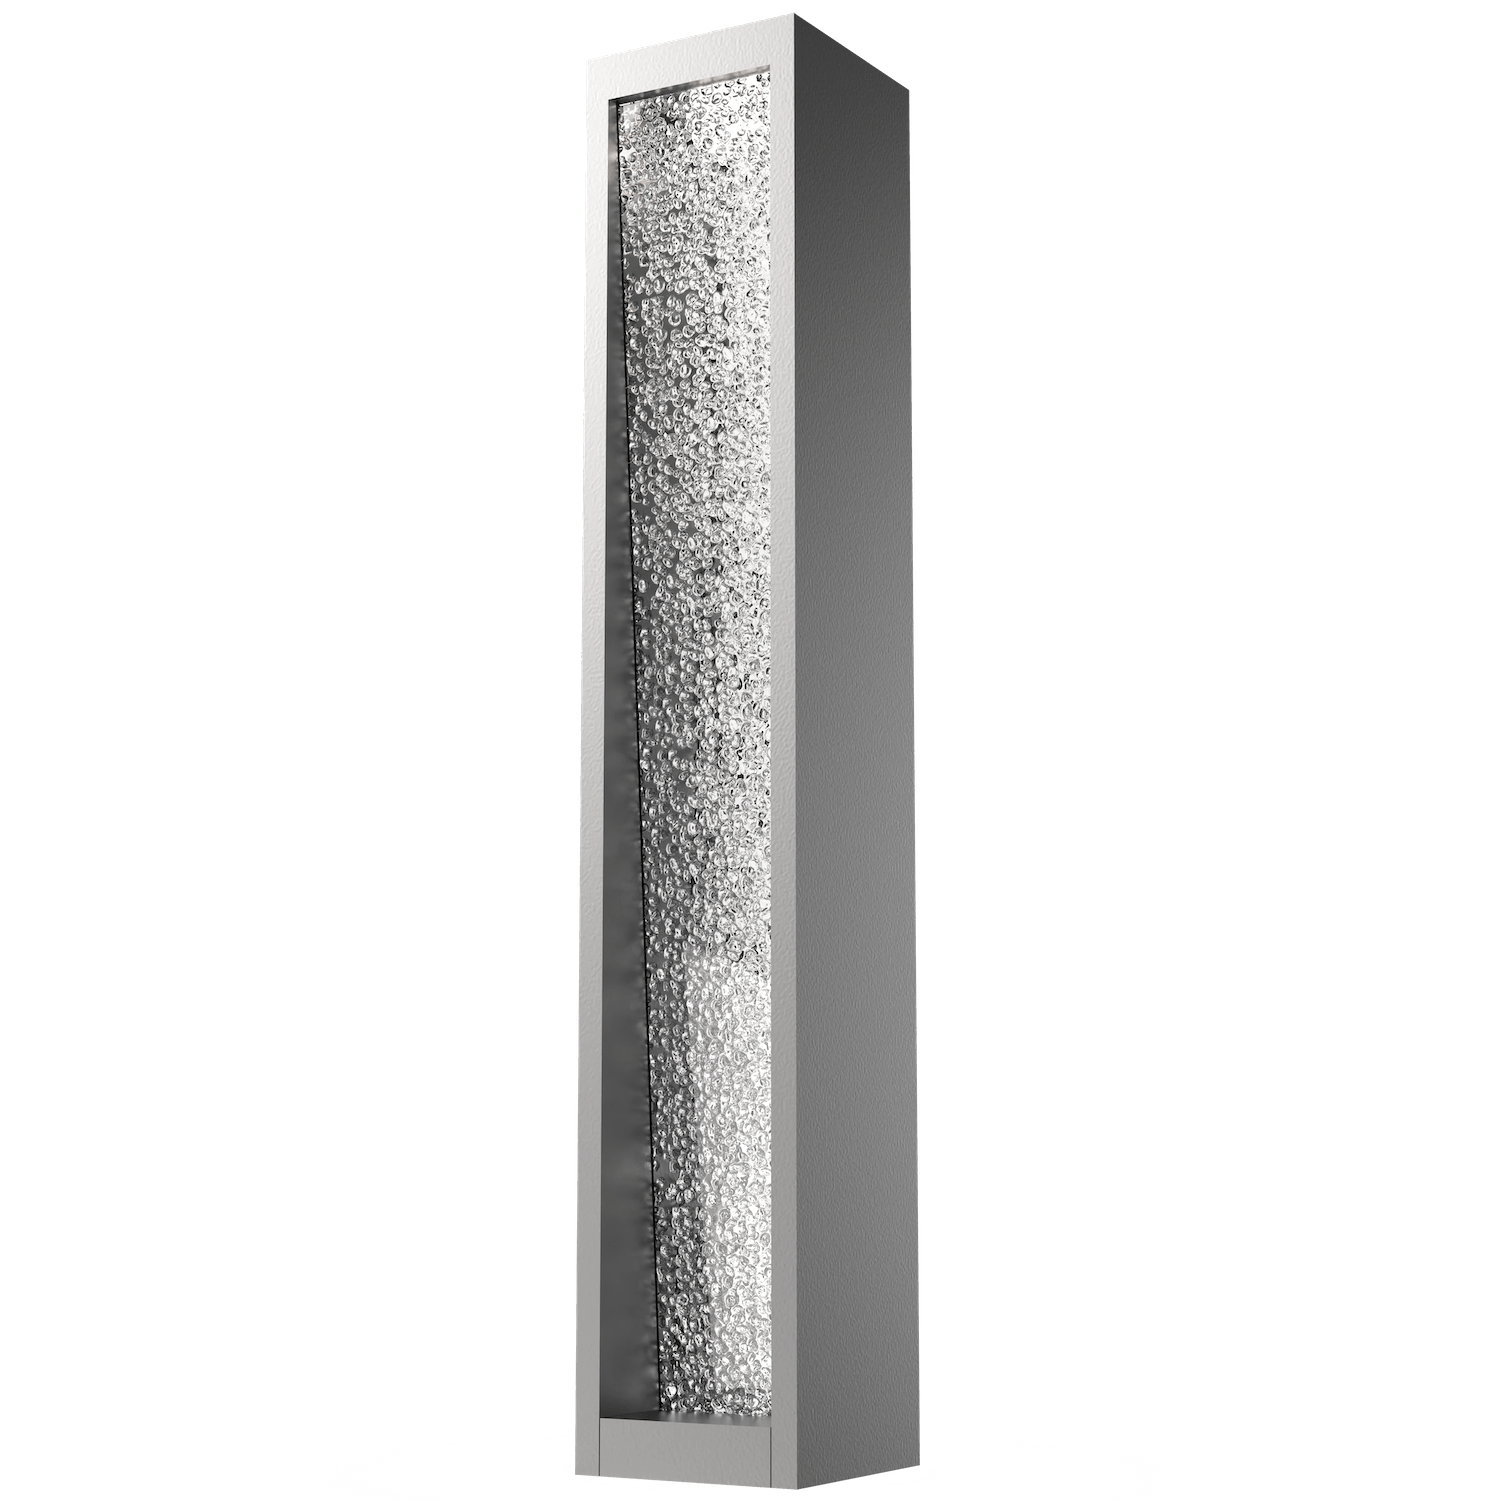 ODB0082-02-AG-CR-Hammerton-Studio-Torrent-26-inch-outdoor-sconce-with-argento-grey-finish-and-crackled-rimelight-glass-shade-and-LED-lamping